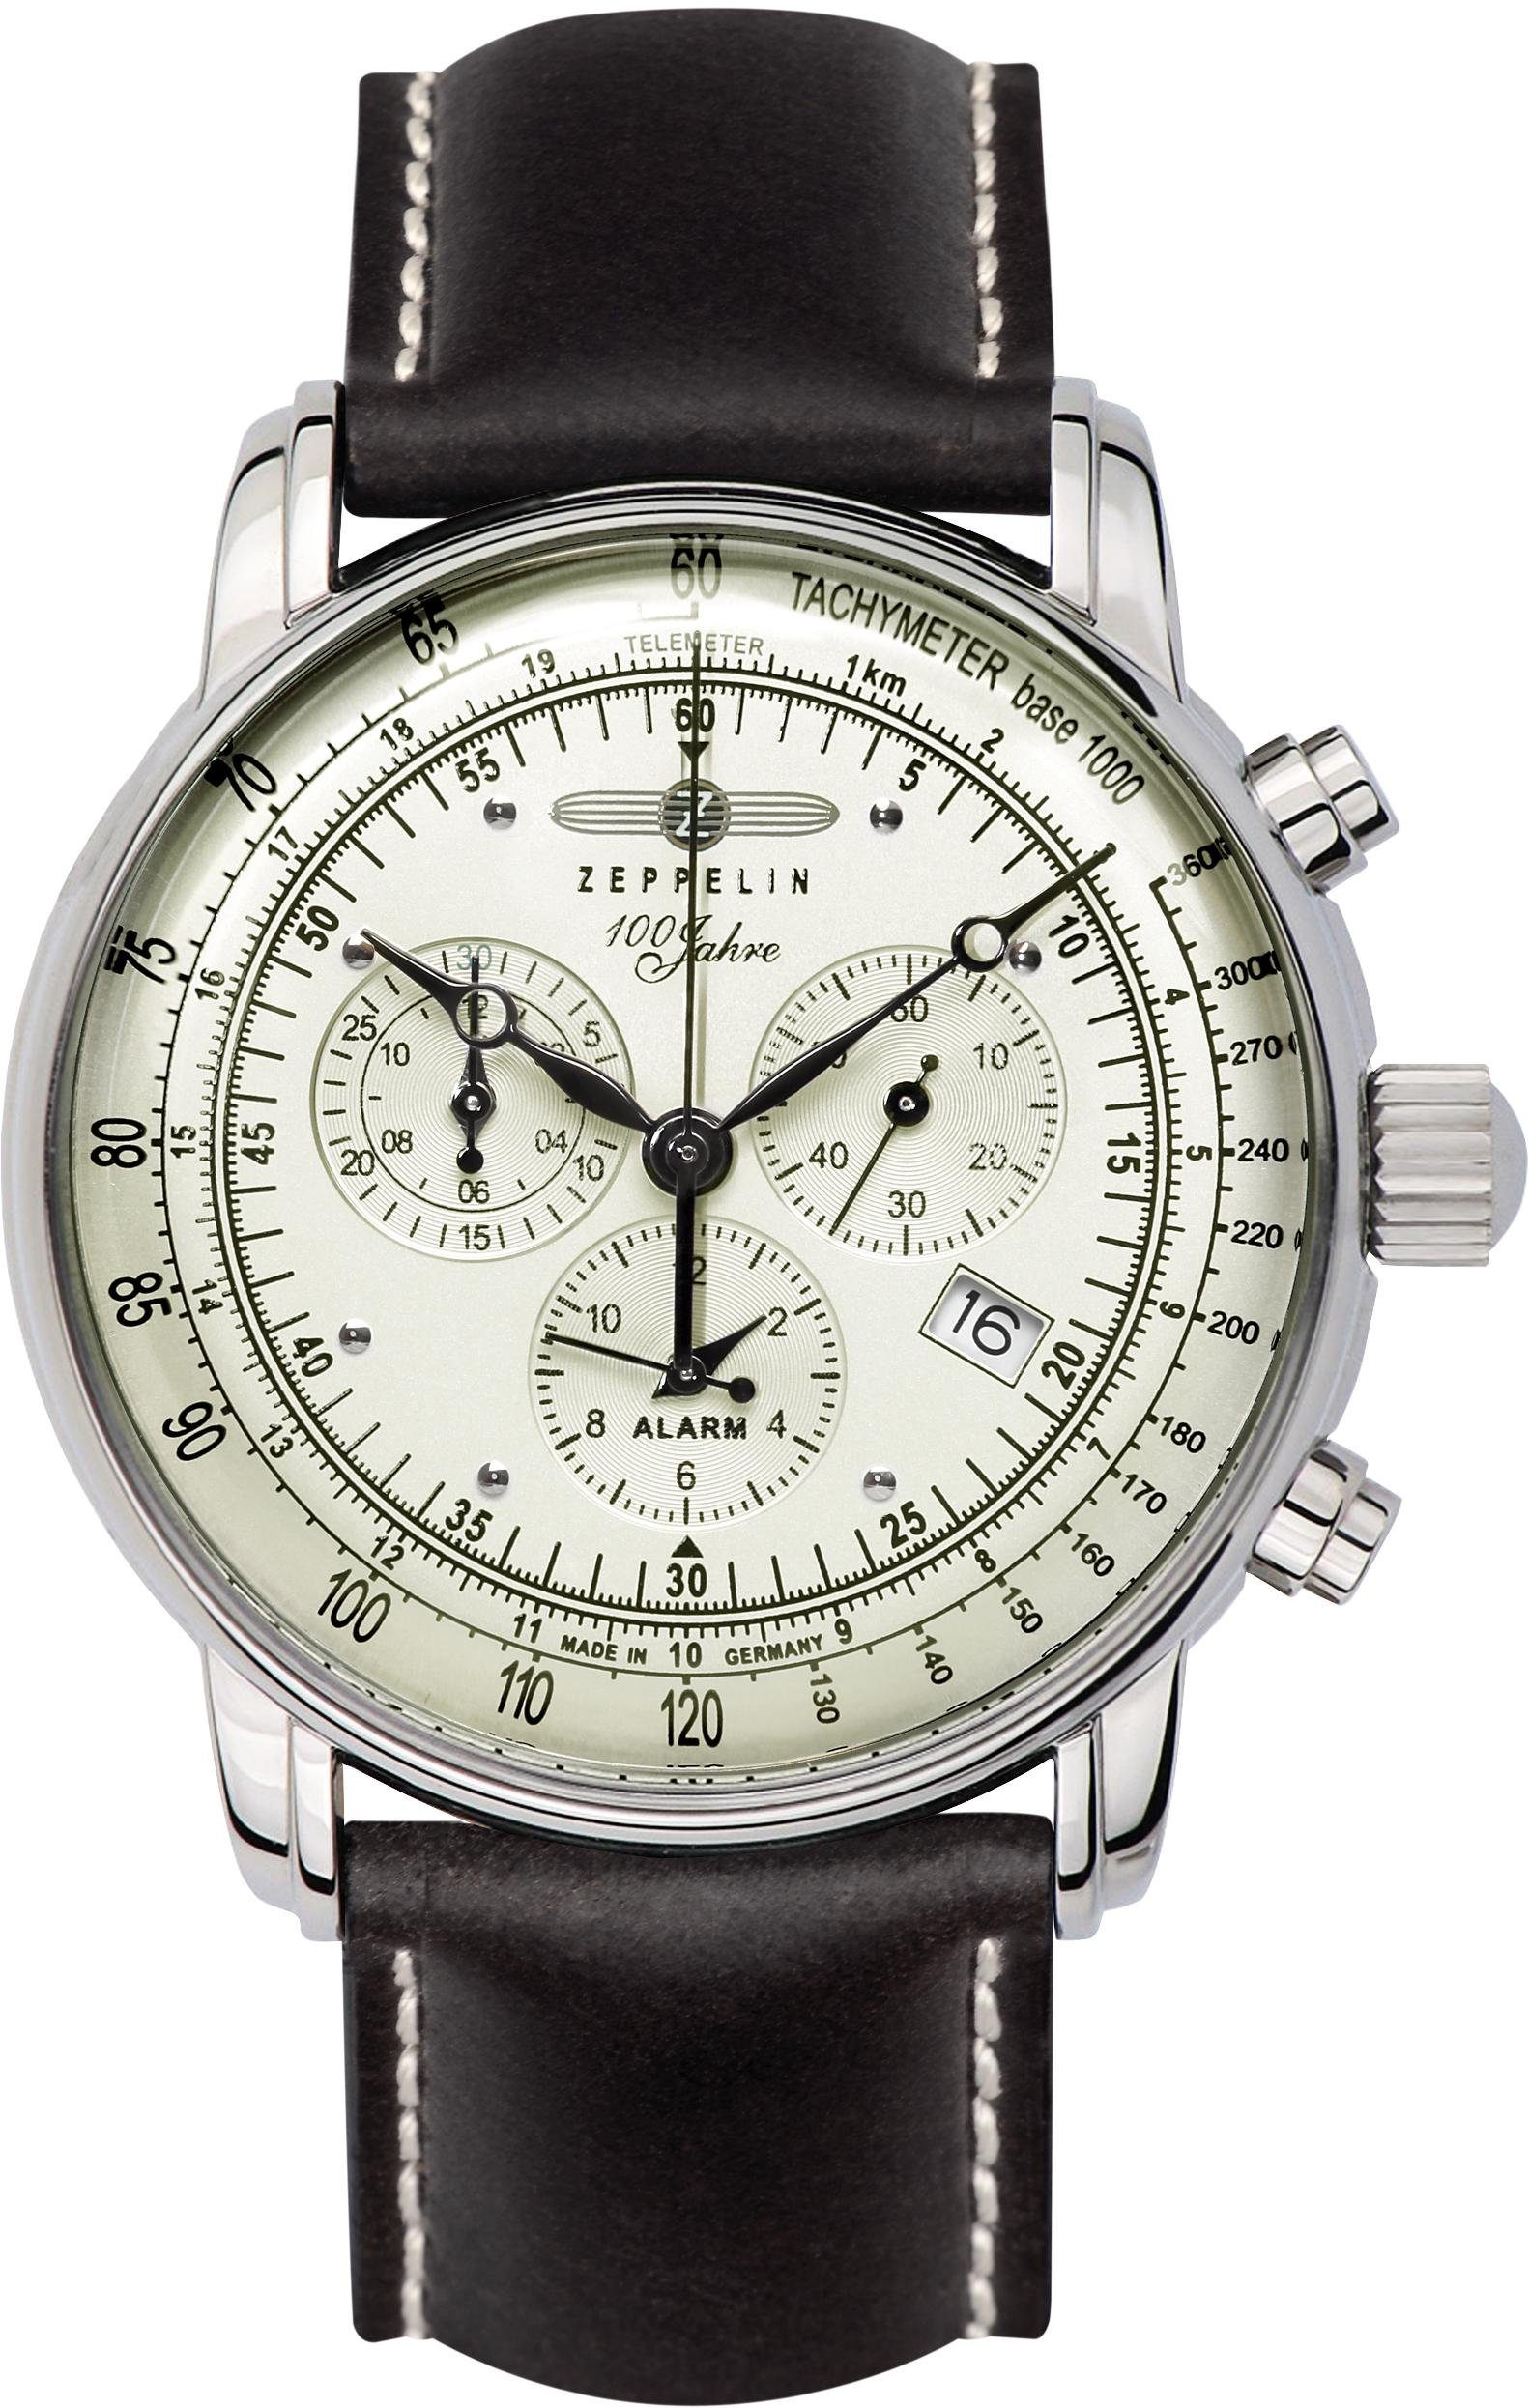 ZEPPELIN Chronograph 100 Jahre Zeppelin, 8680-3, Made in Germany